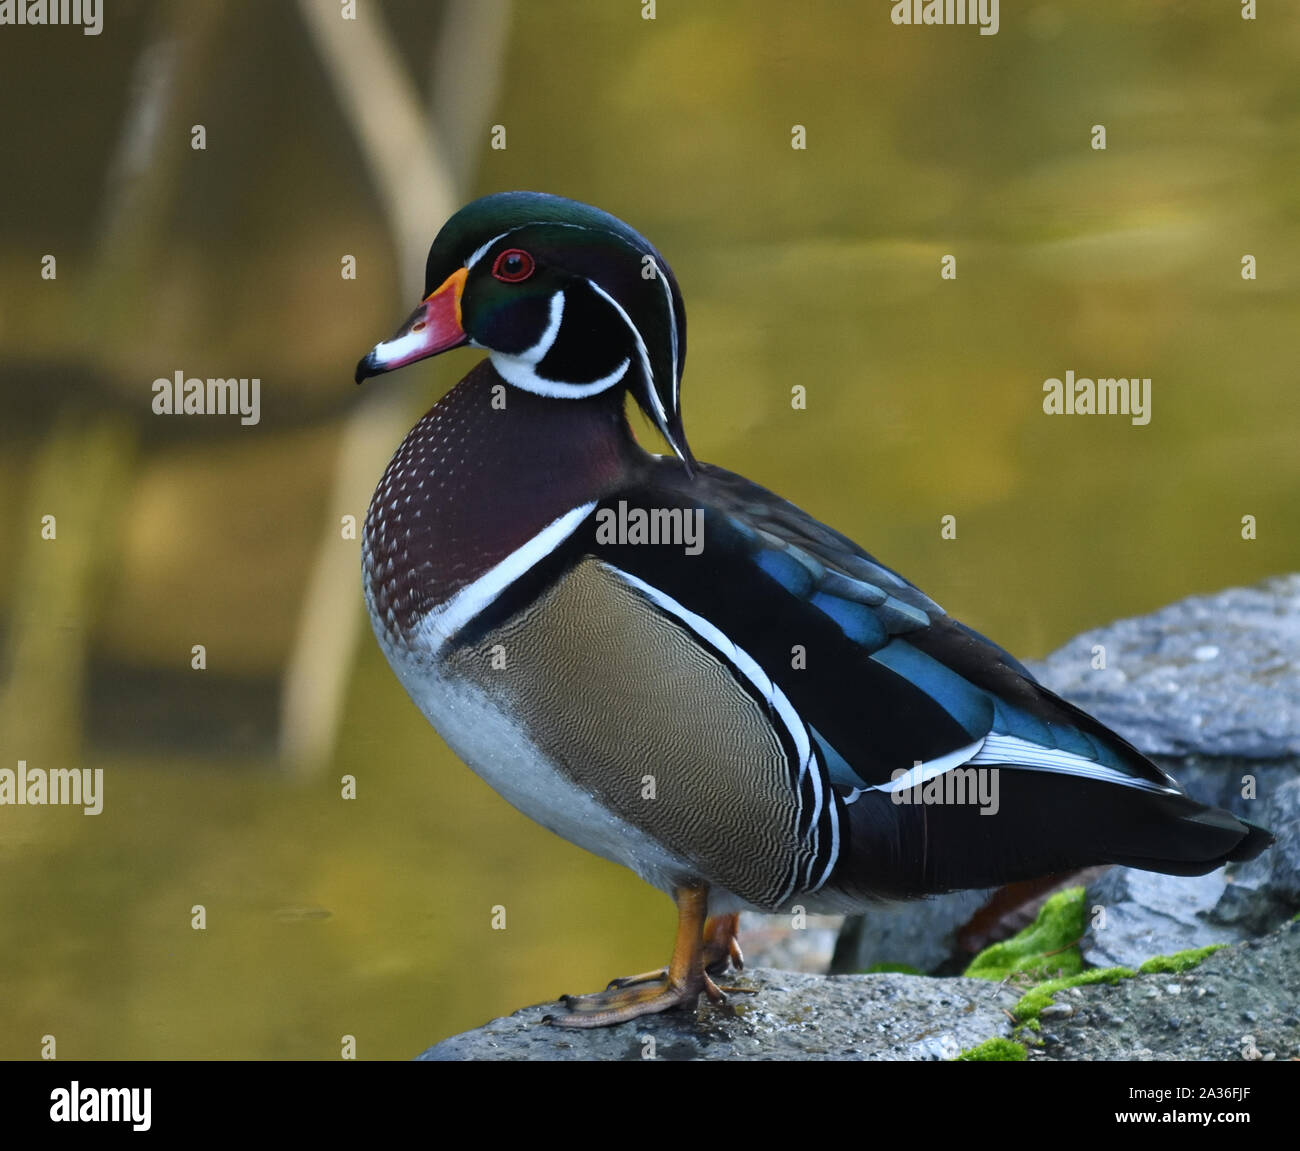 A male wood duck or Carolina duck (Aix sponsa) beside a wooded pool in Stanley Park. Lost Lagoon, Stanley Park, Vancouver, British Columbia, Canada. Stock Photo